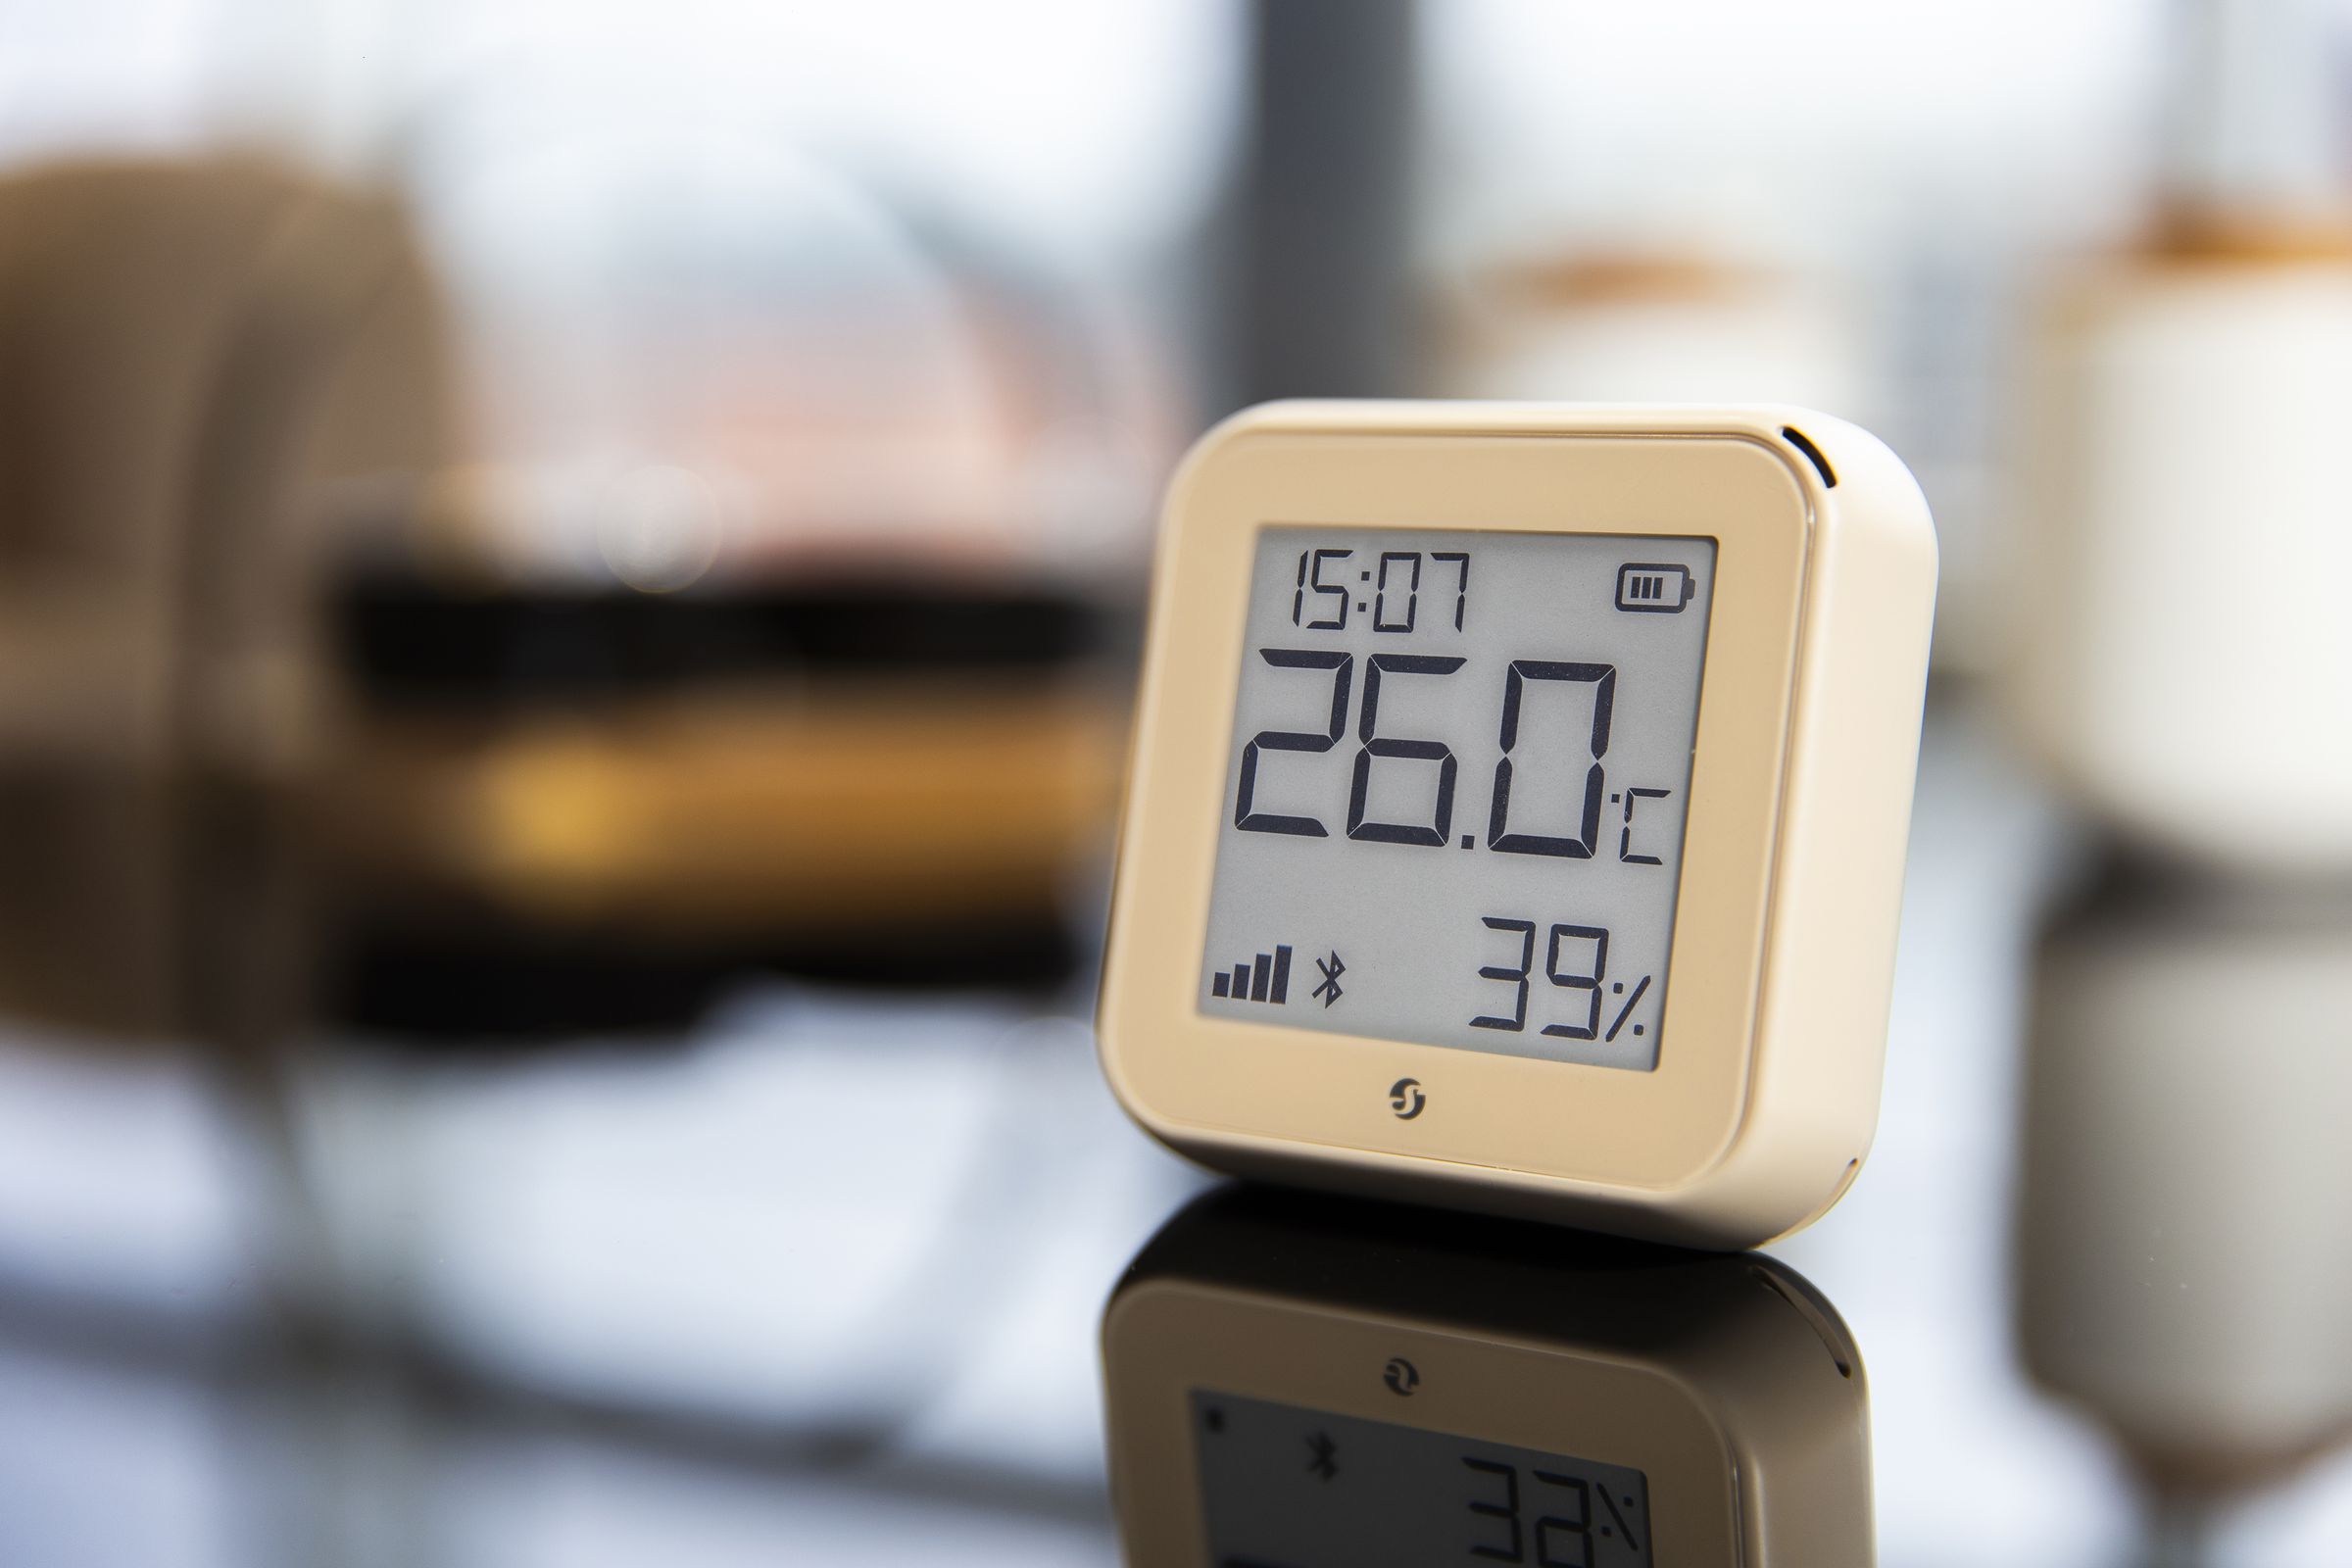 Shelly’s new humidity and temperature sensor comes in black, white (ivory), and mocha. It features a clock on its e-paper display and can be upgraded to Matter.